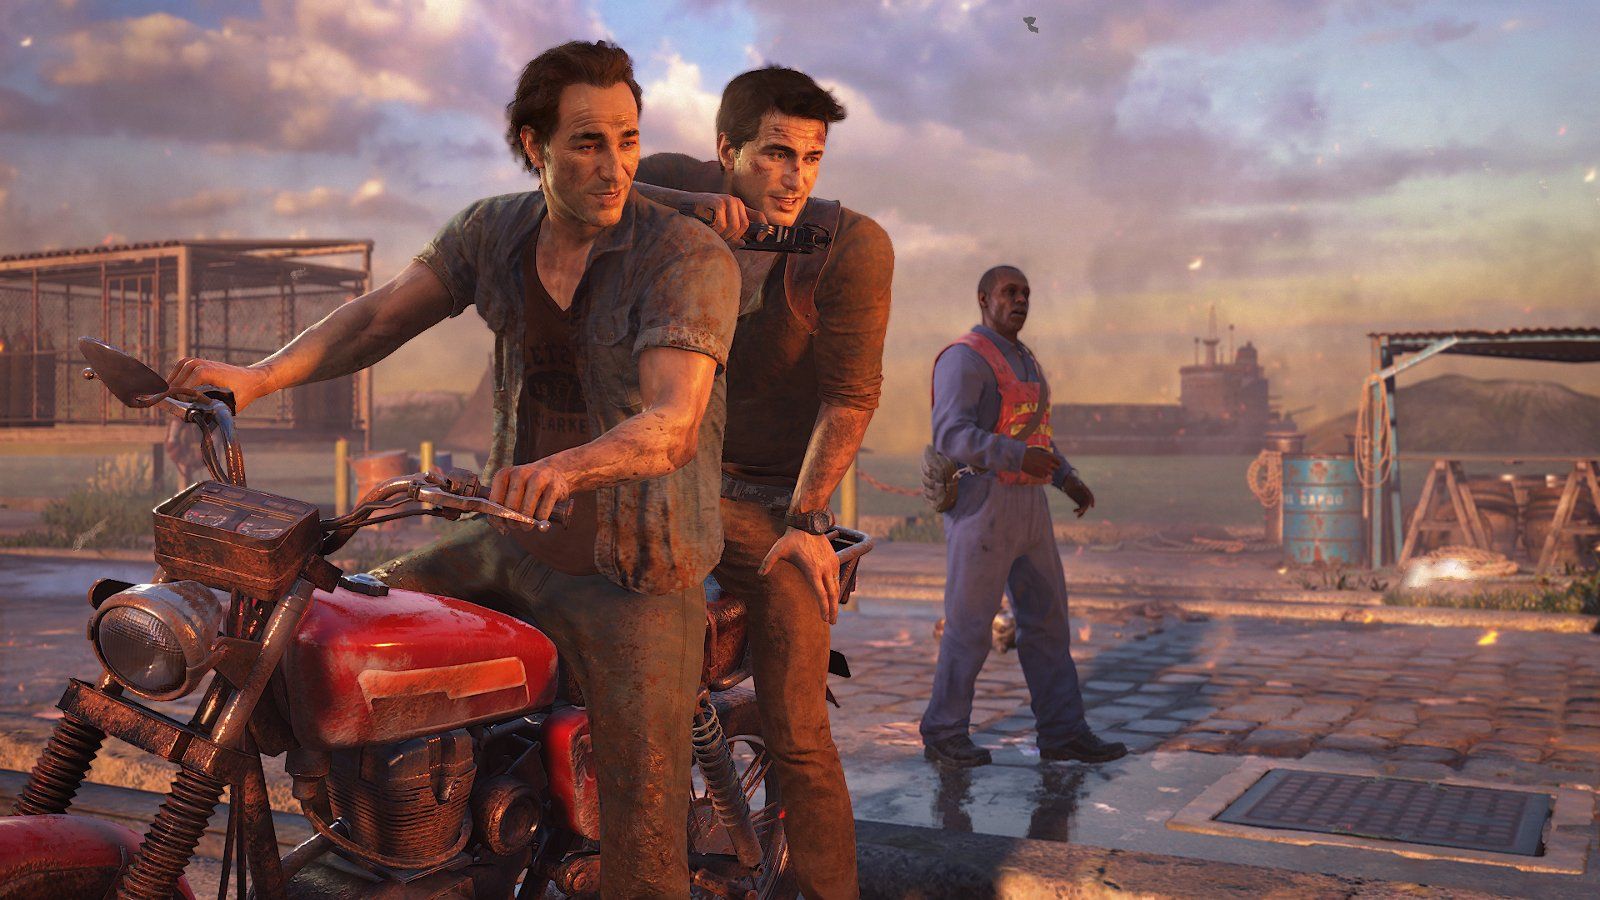 Uncharted 4: A Thief's End marked the end of Nathan Drake's story.